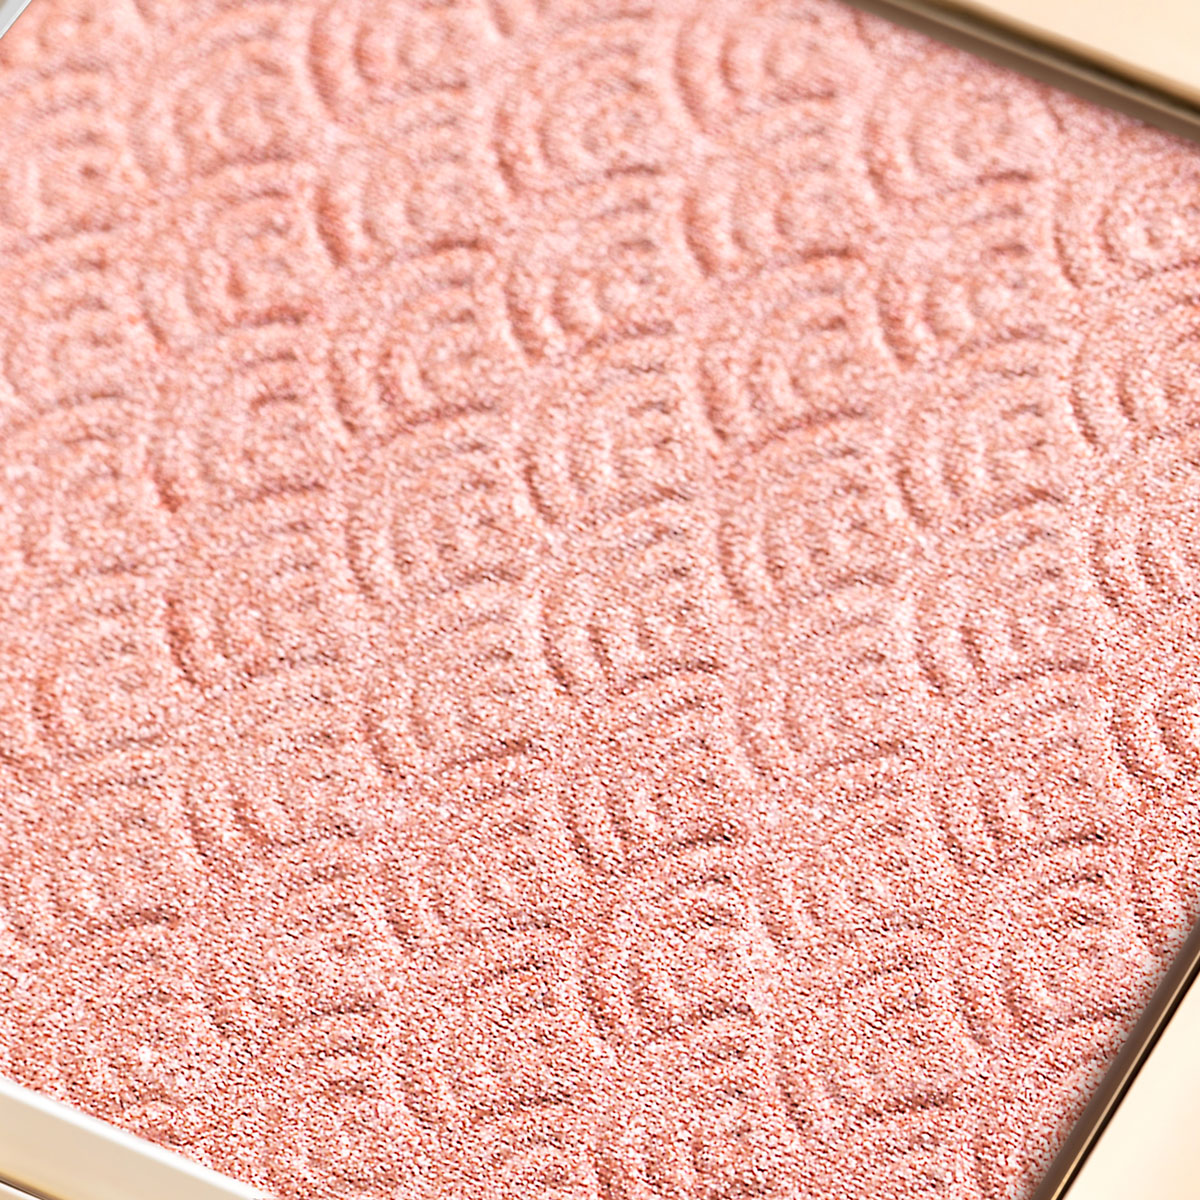 Catkin Moonlight Highlighter Powder Shimmer Glow, Natural Pink Highlight Contouring Palette Natural Glowing Finish